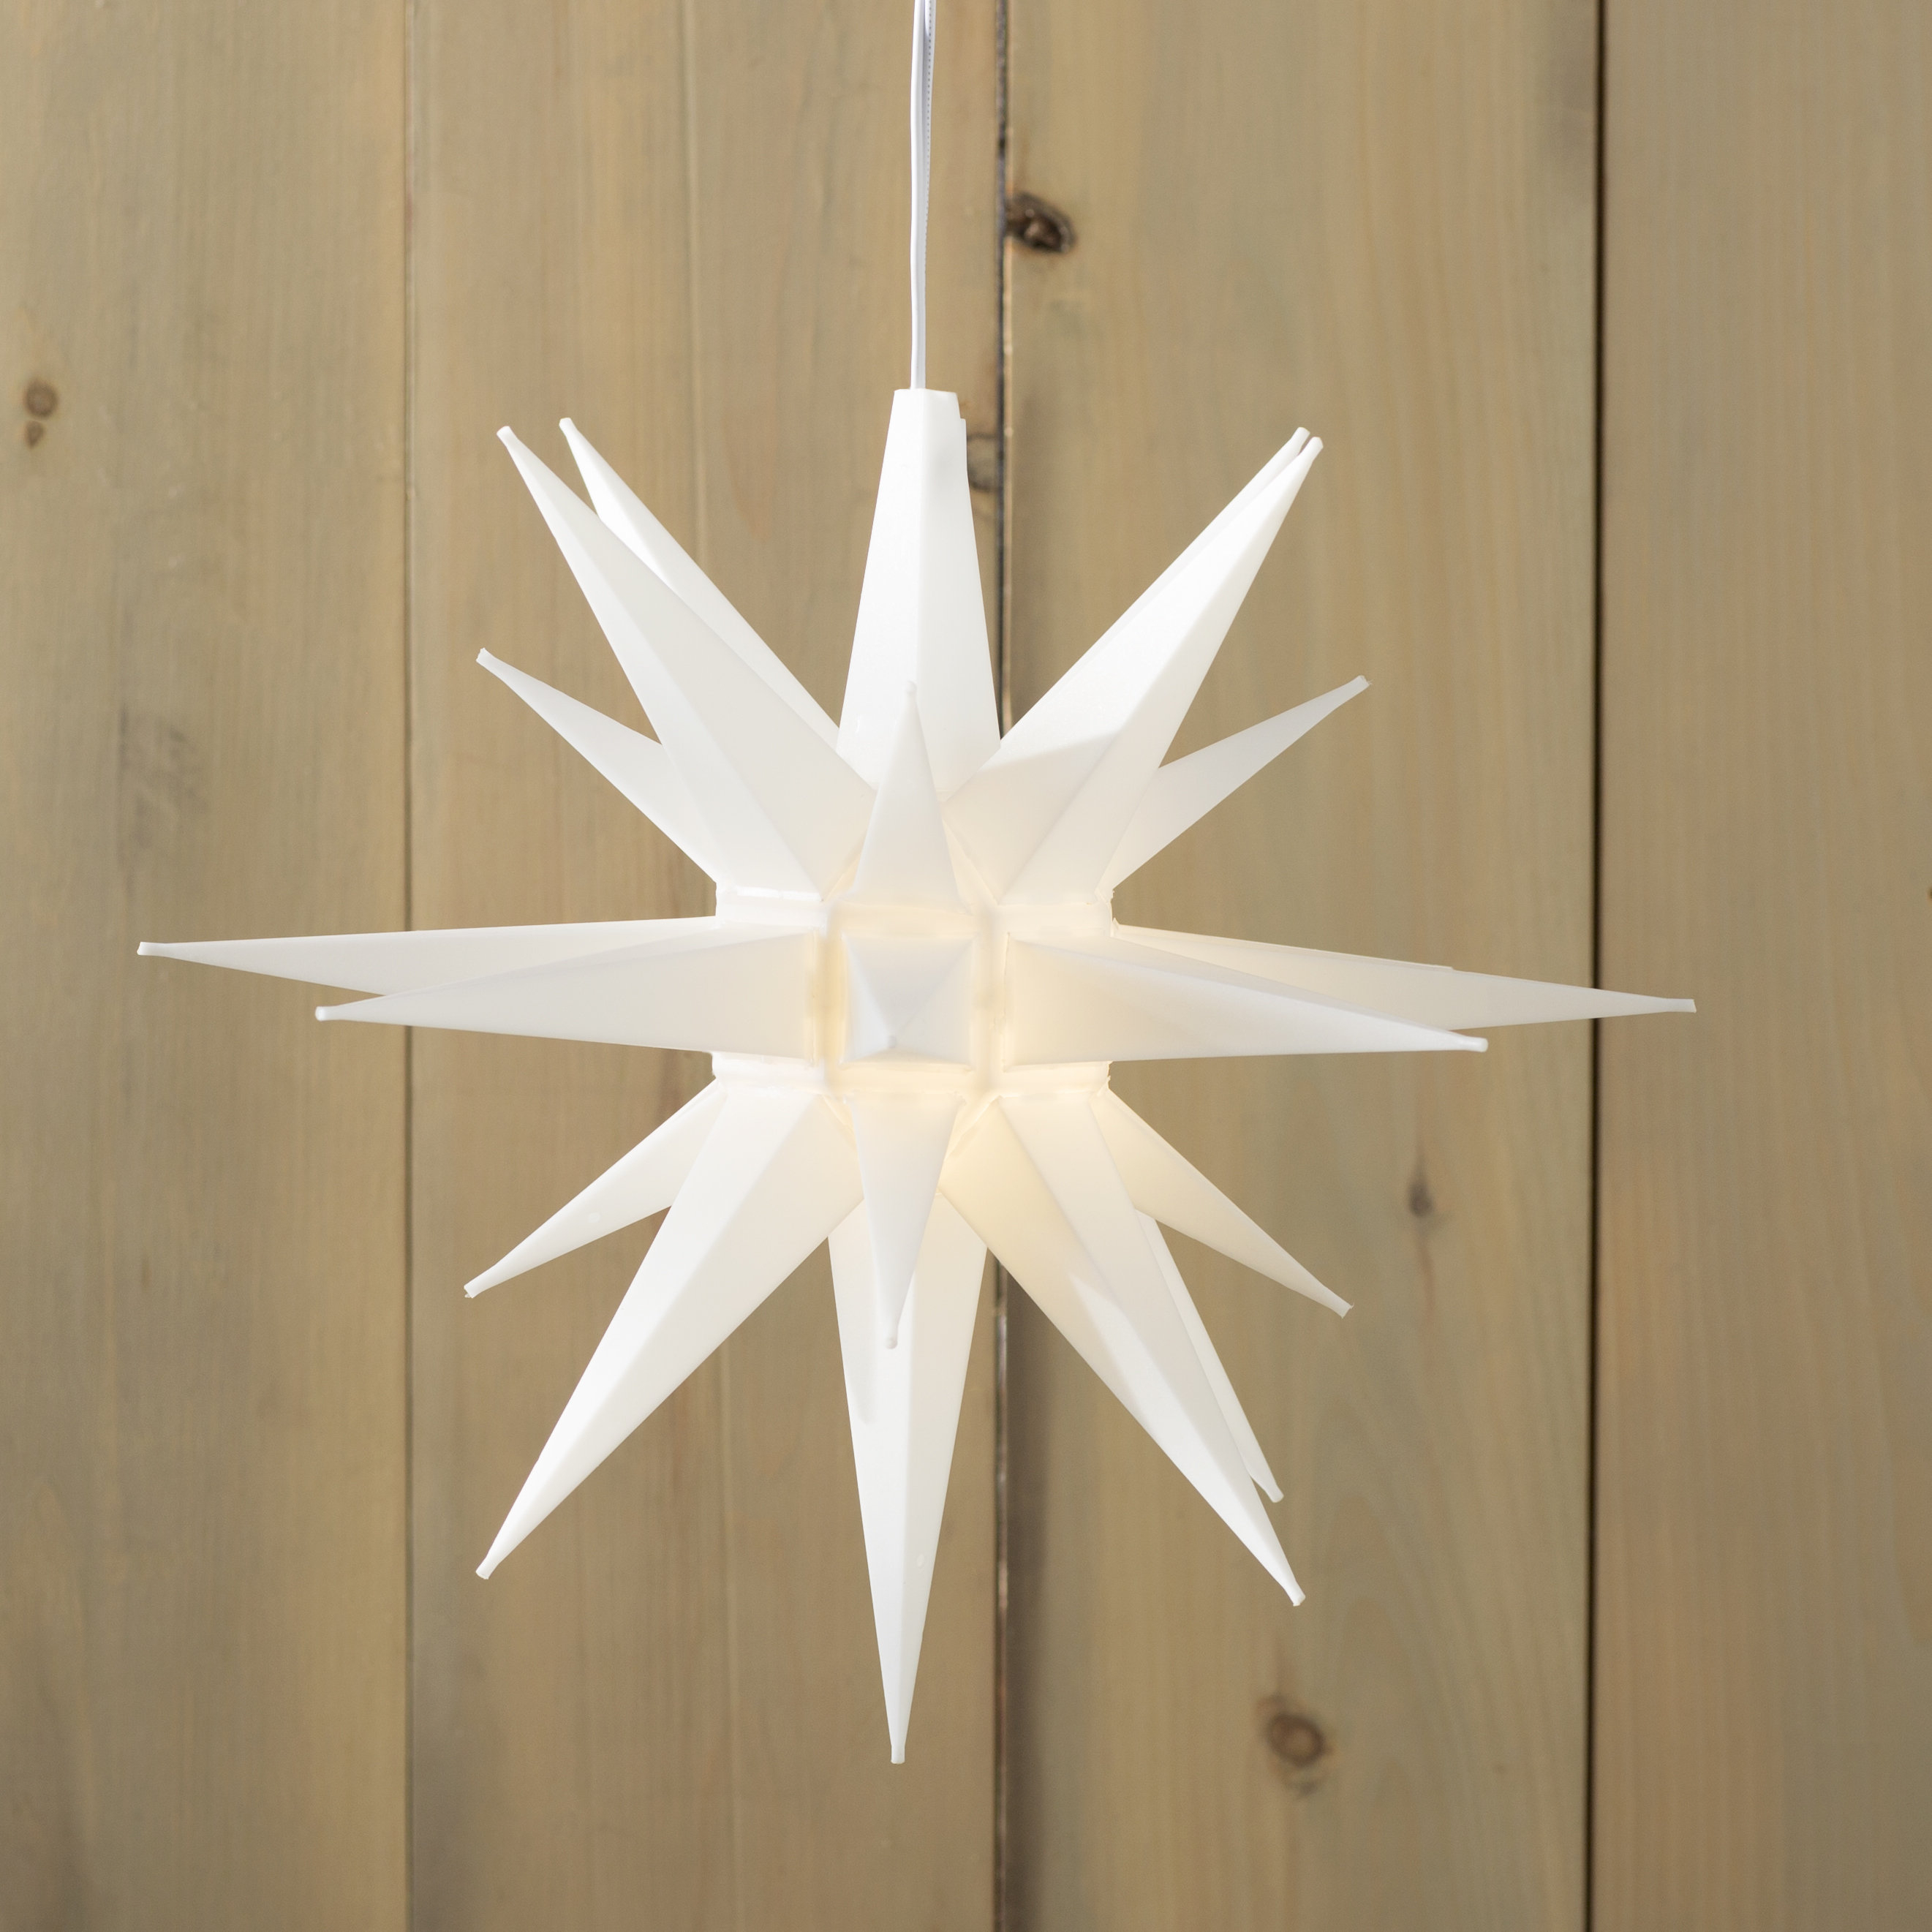 21 White Moravian Star Perfect Big Christmas Light For Outdoor inside sizing 2642 X 2642